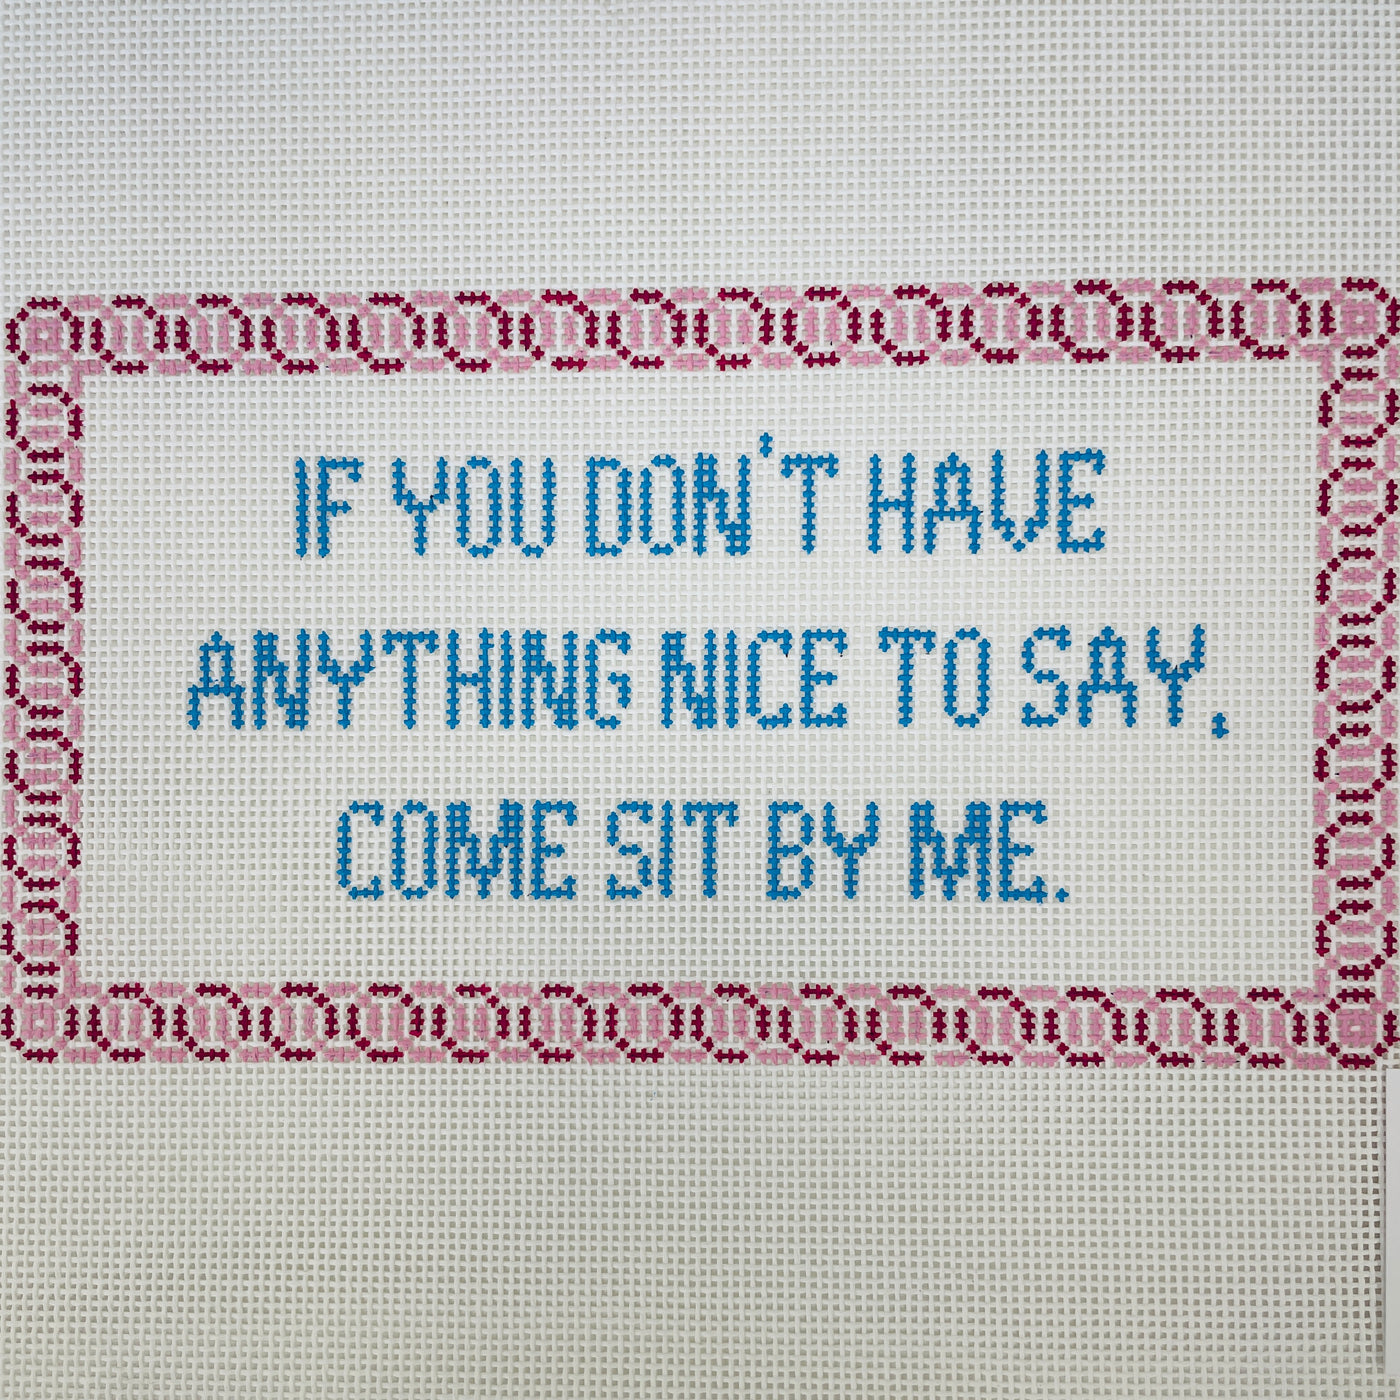 Don't Have Anything Nice to Say? Sit By Me Needlepoint Canvas